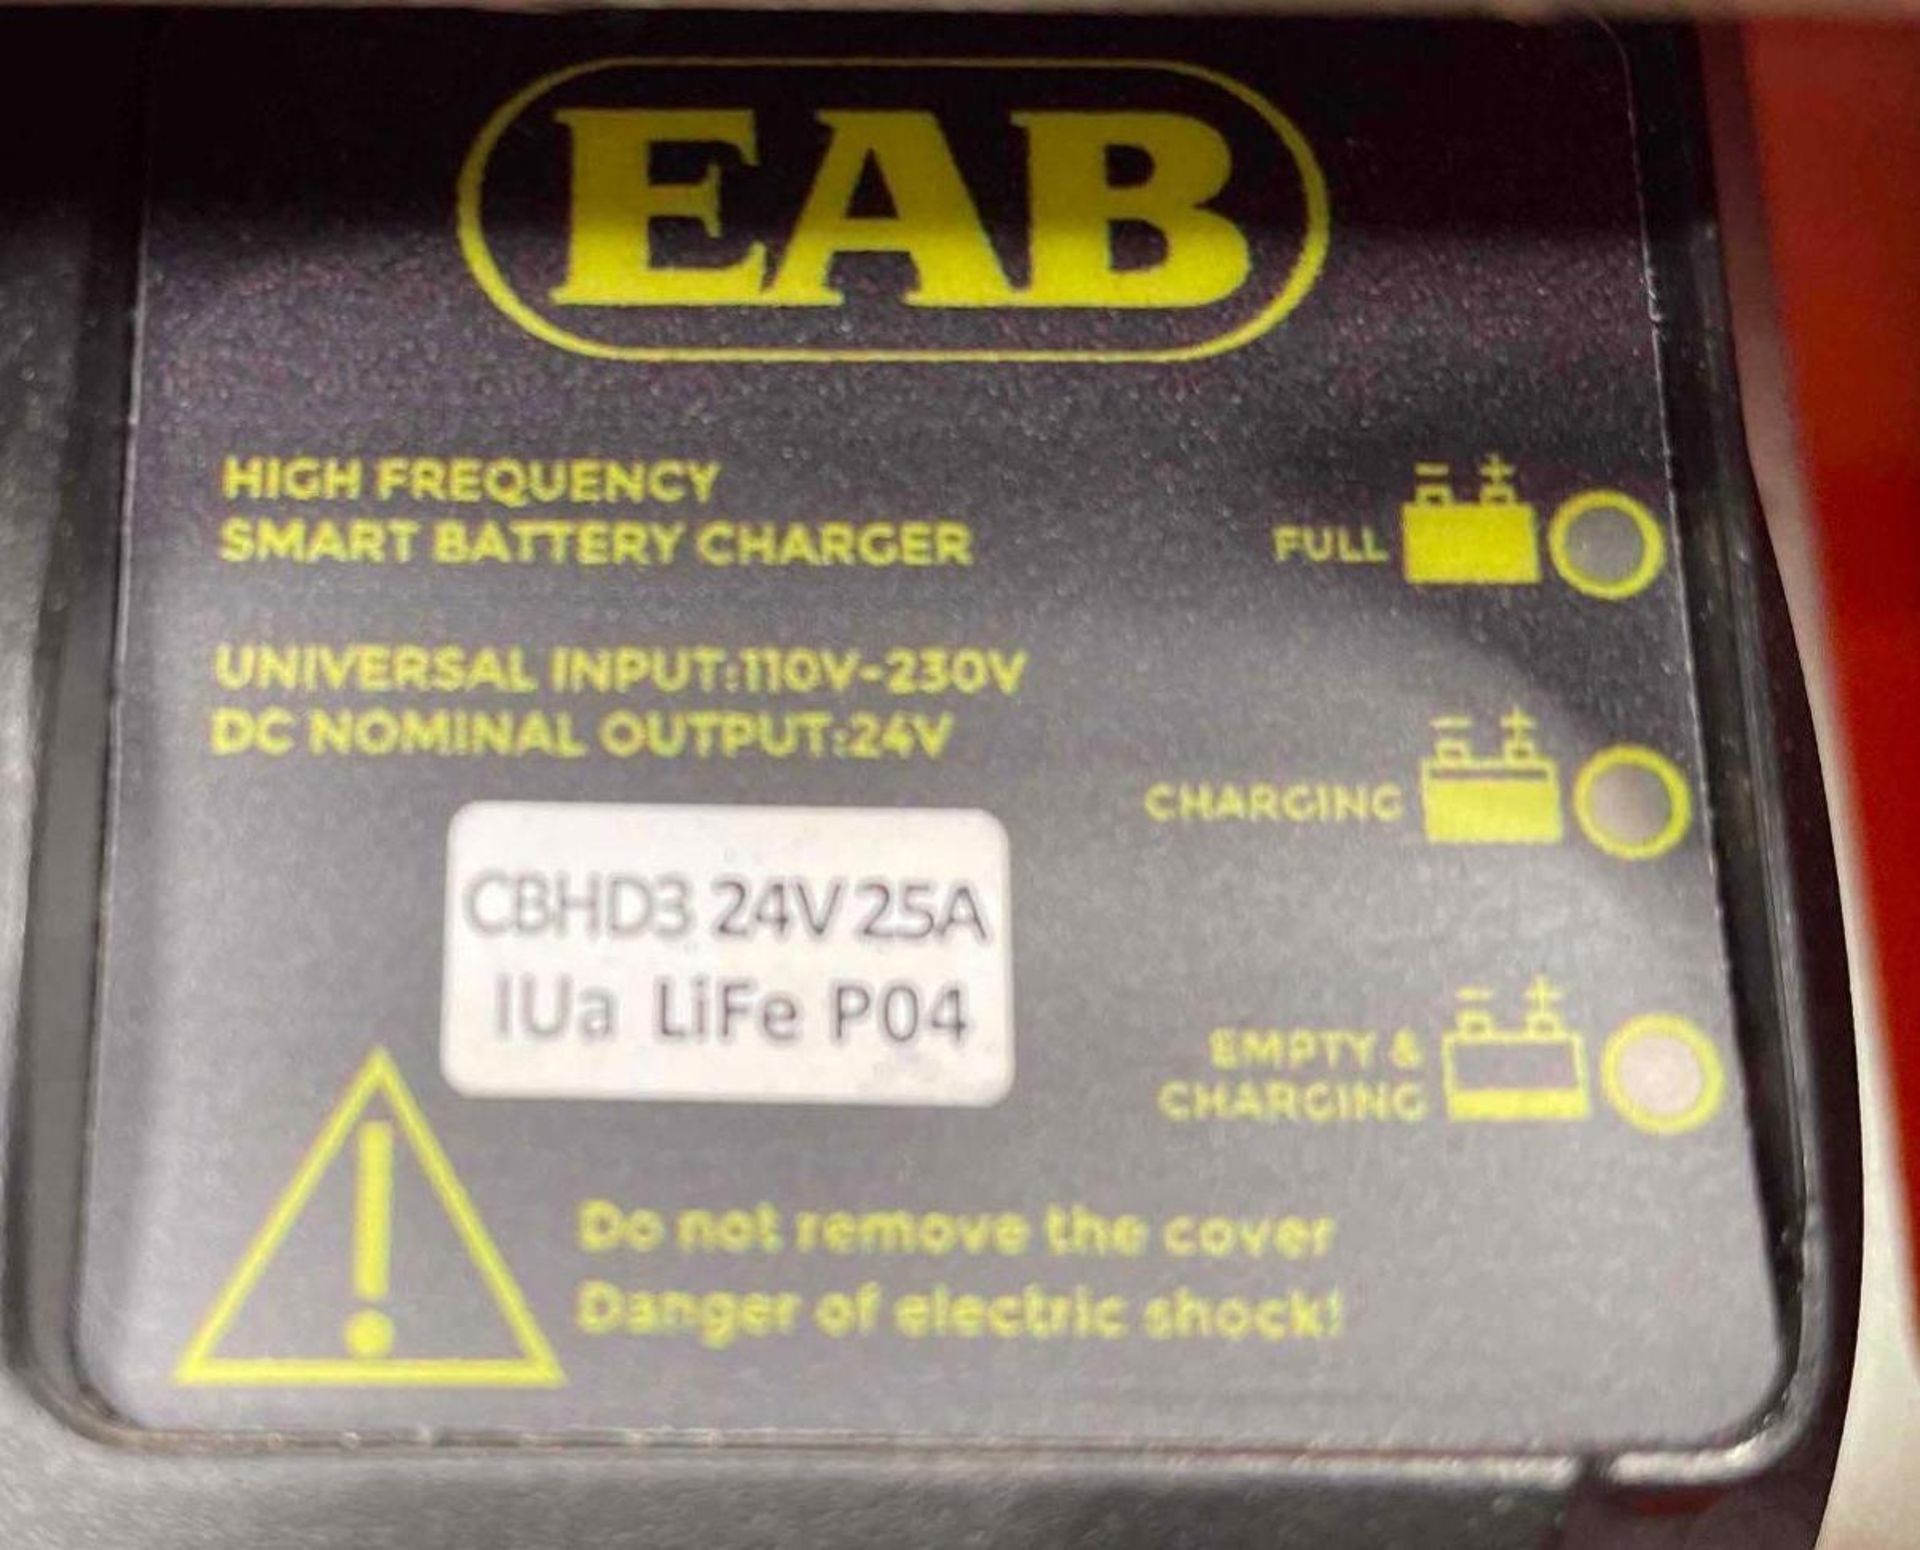 EAB Maxipower Lithium Ion Smart Battery Charger, #CBHD3 24V w/ 4 Batteries 120V - Image 13 of 14